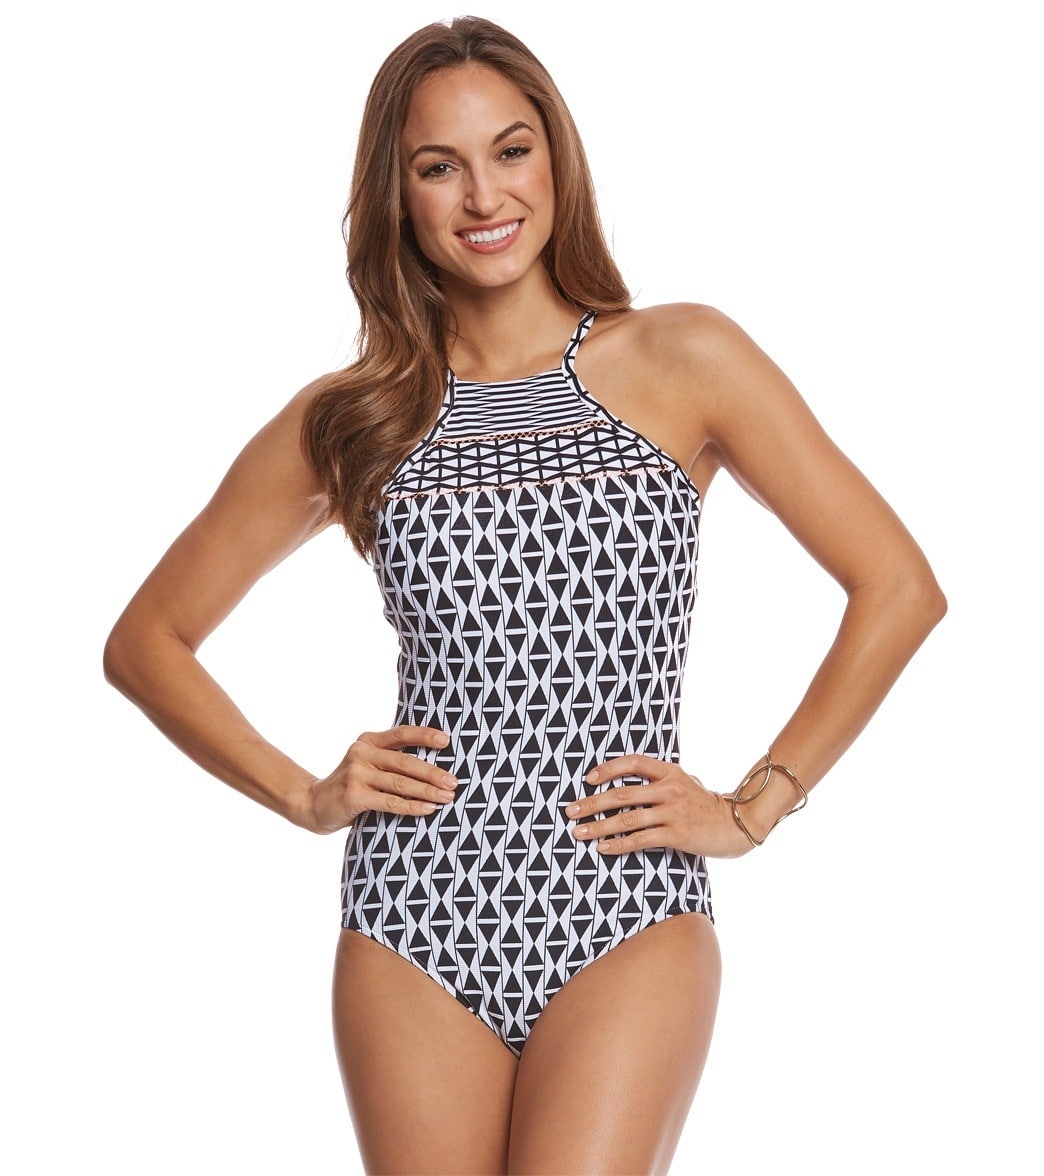 Seafolly Modern Geometry High Neck One Piece Swimsuit Dd Cup At Free Shipping